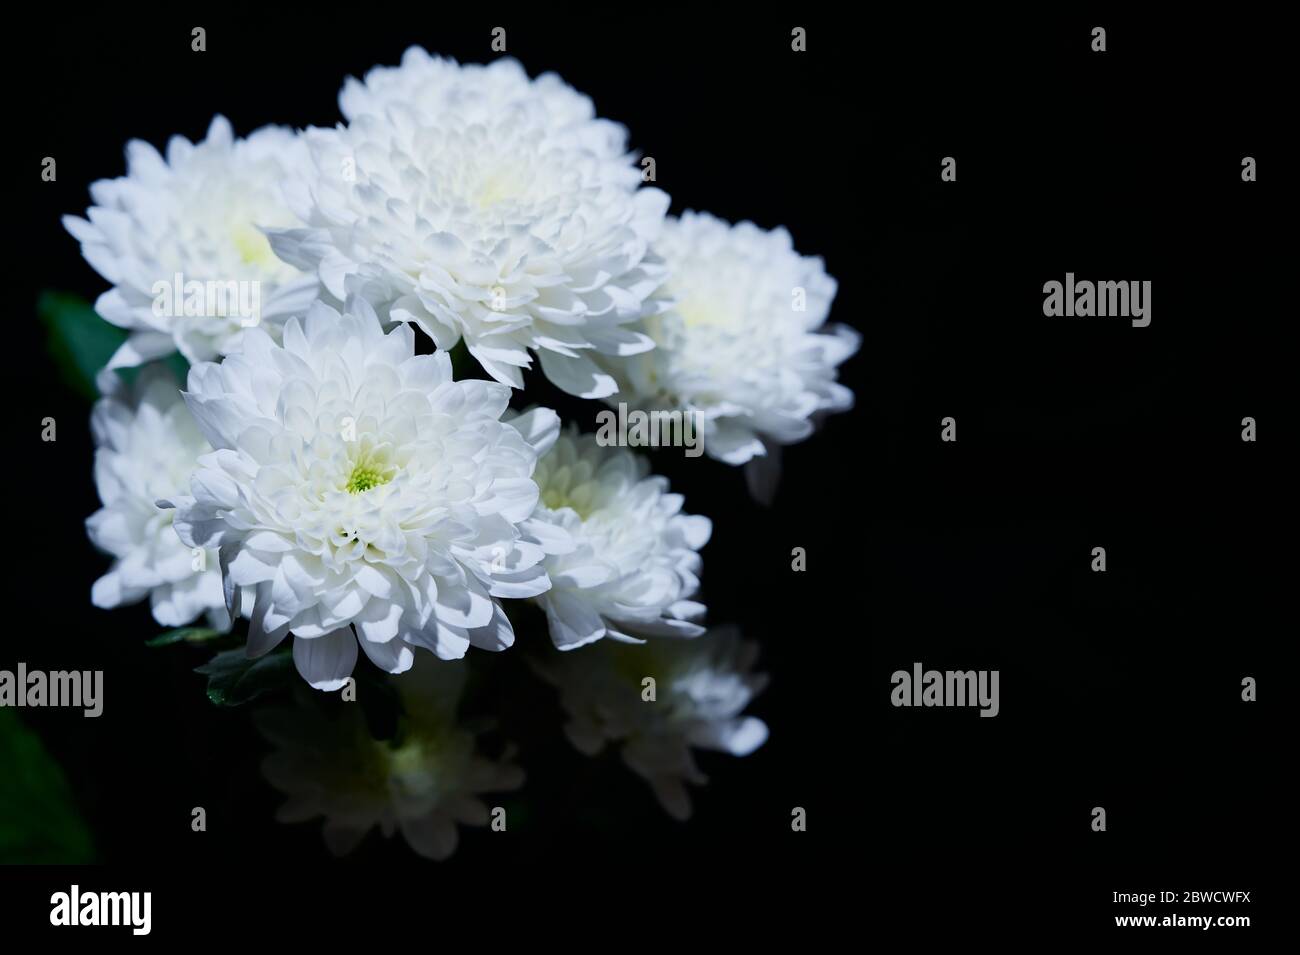 bunch of white dahlia flowers against black background with copy space Stock Photo